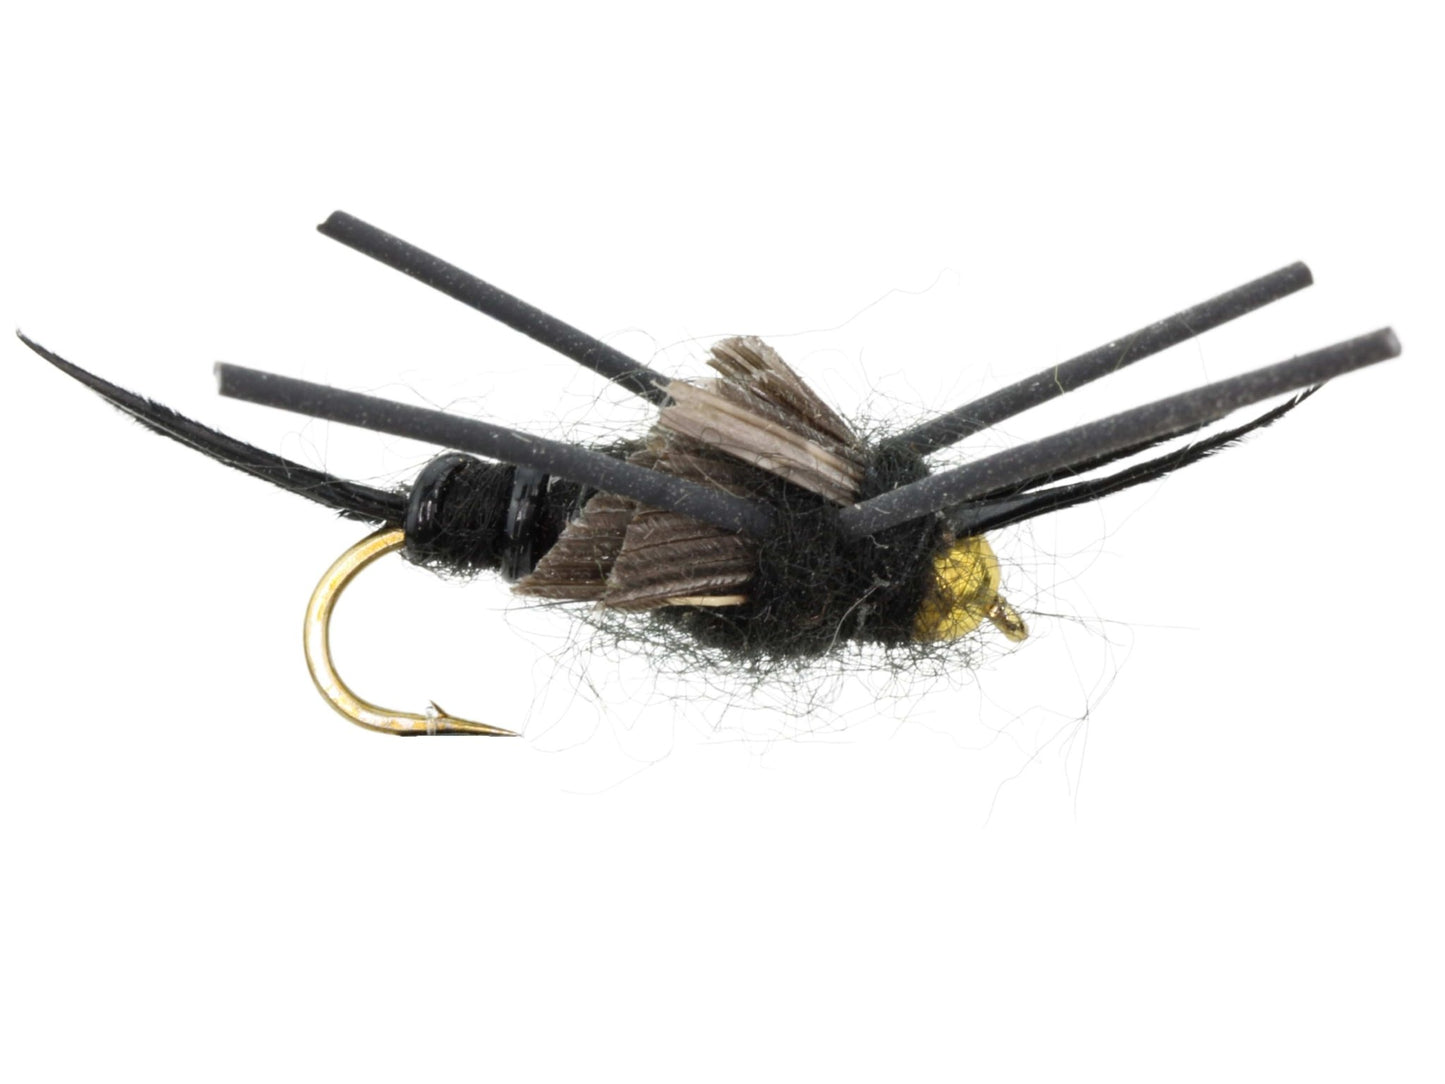 Wild Water Fly Fishing Fly Tying Material Kit, Bead Head Stonefly - Angler's Pro Tackle & Outdoors